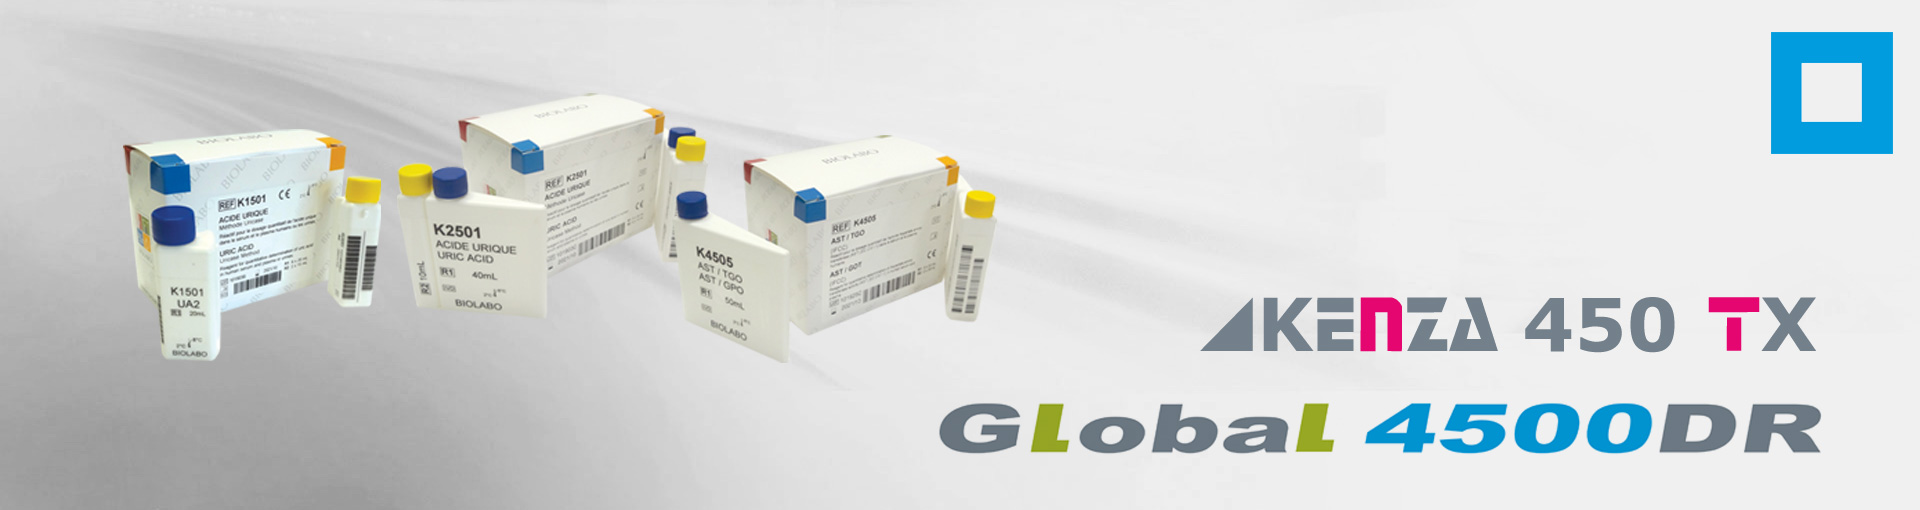 Biochemistry reagents dedicated to KENZA 450 TX and GLOBAL 4500DR